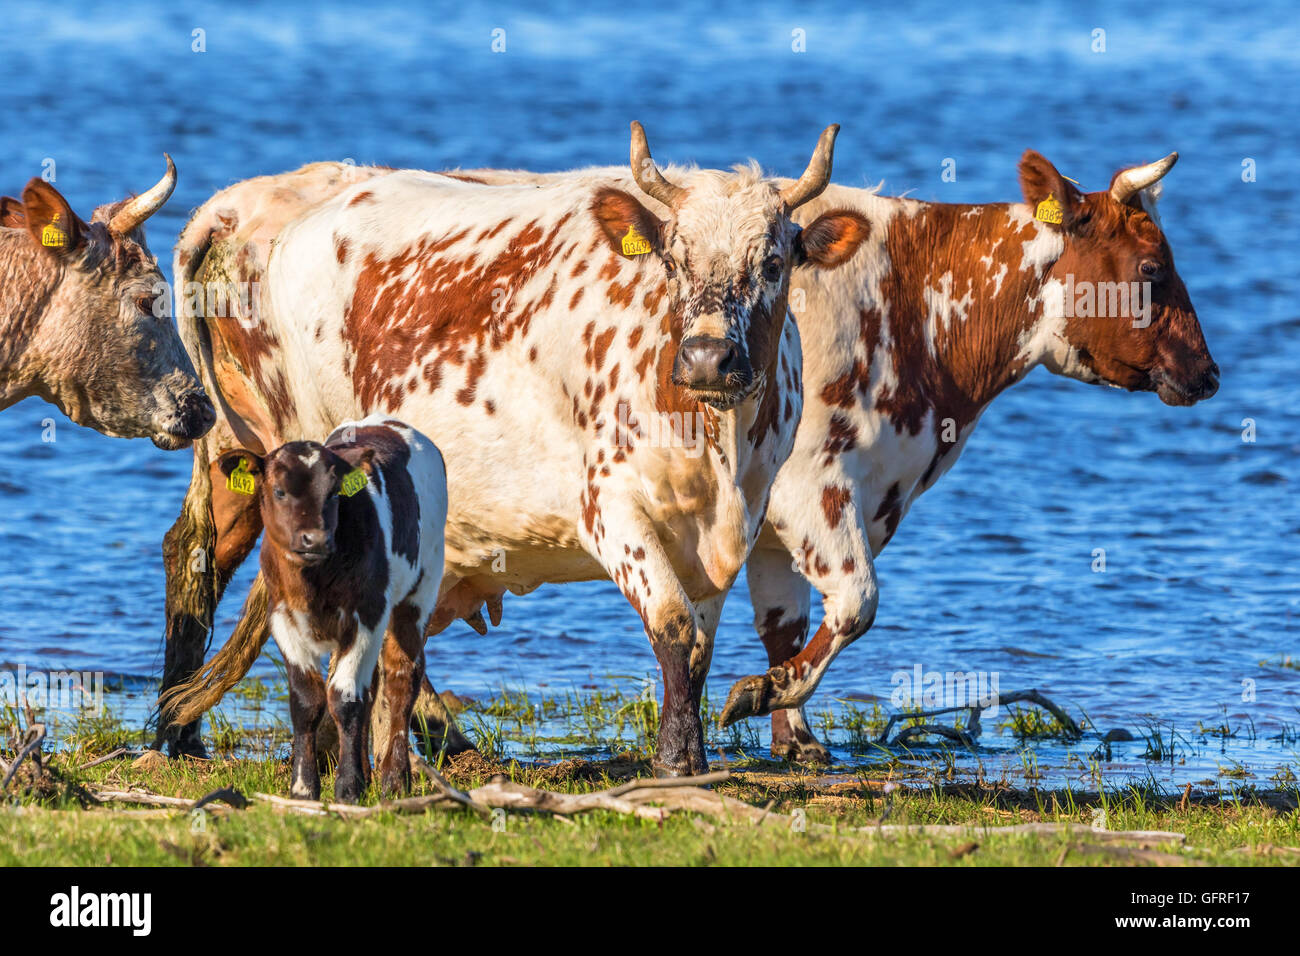 Cows with calves on the beach by a lake Stock Photo